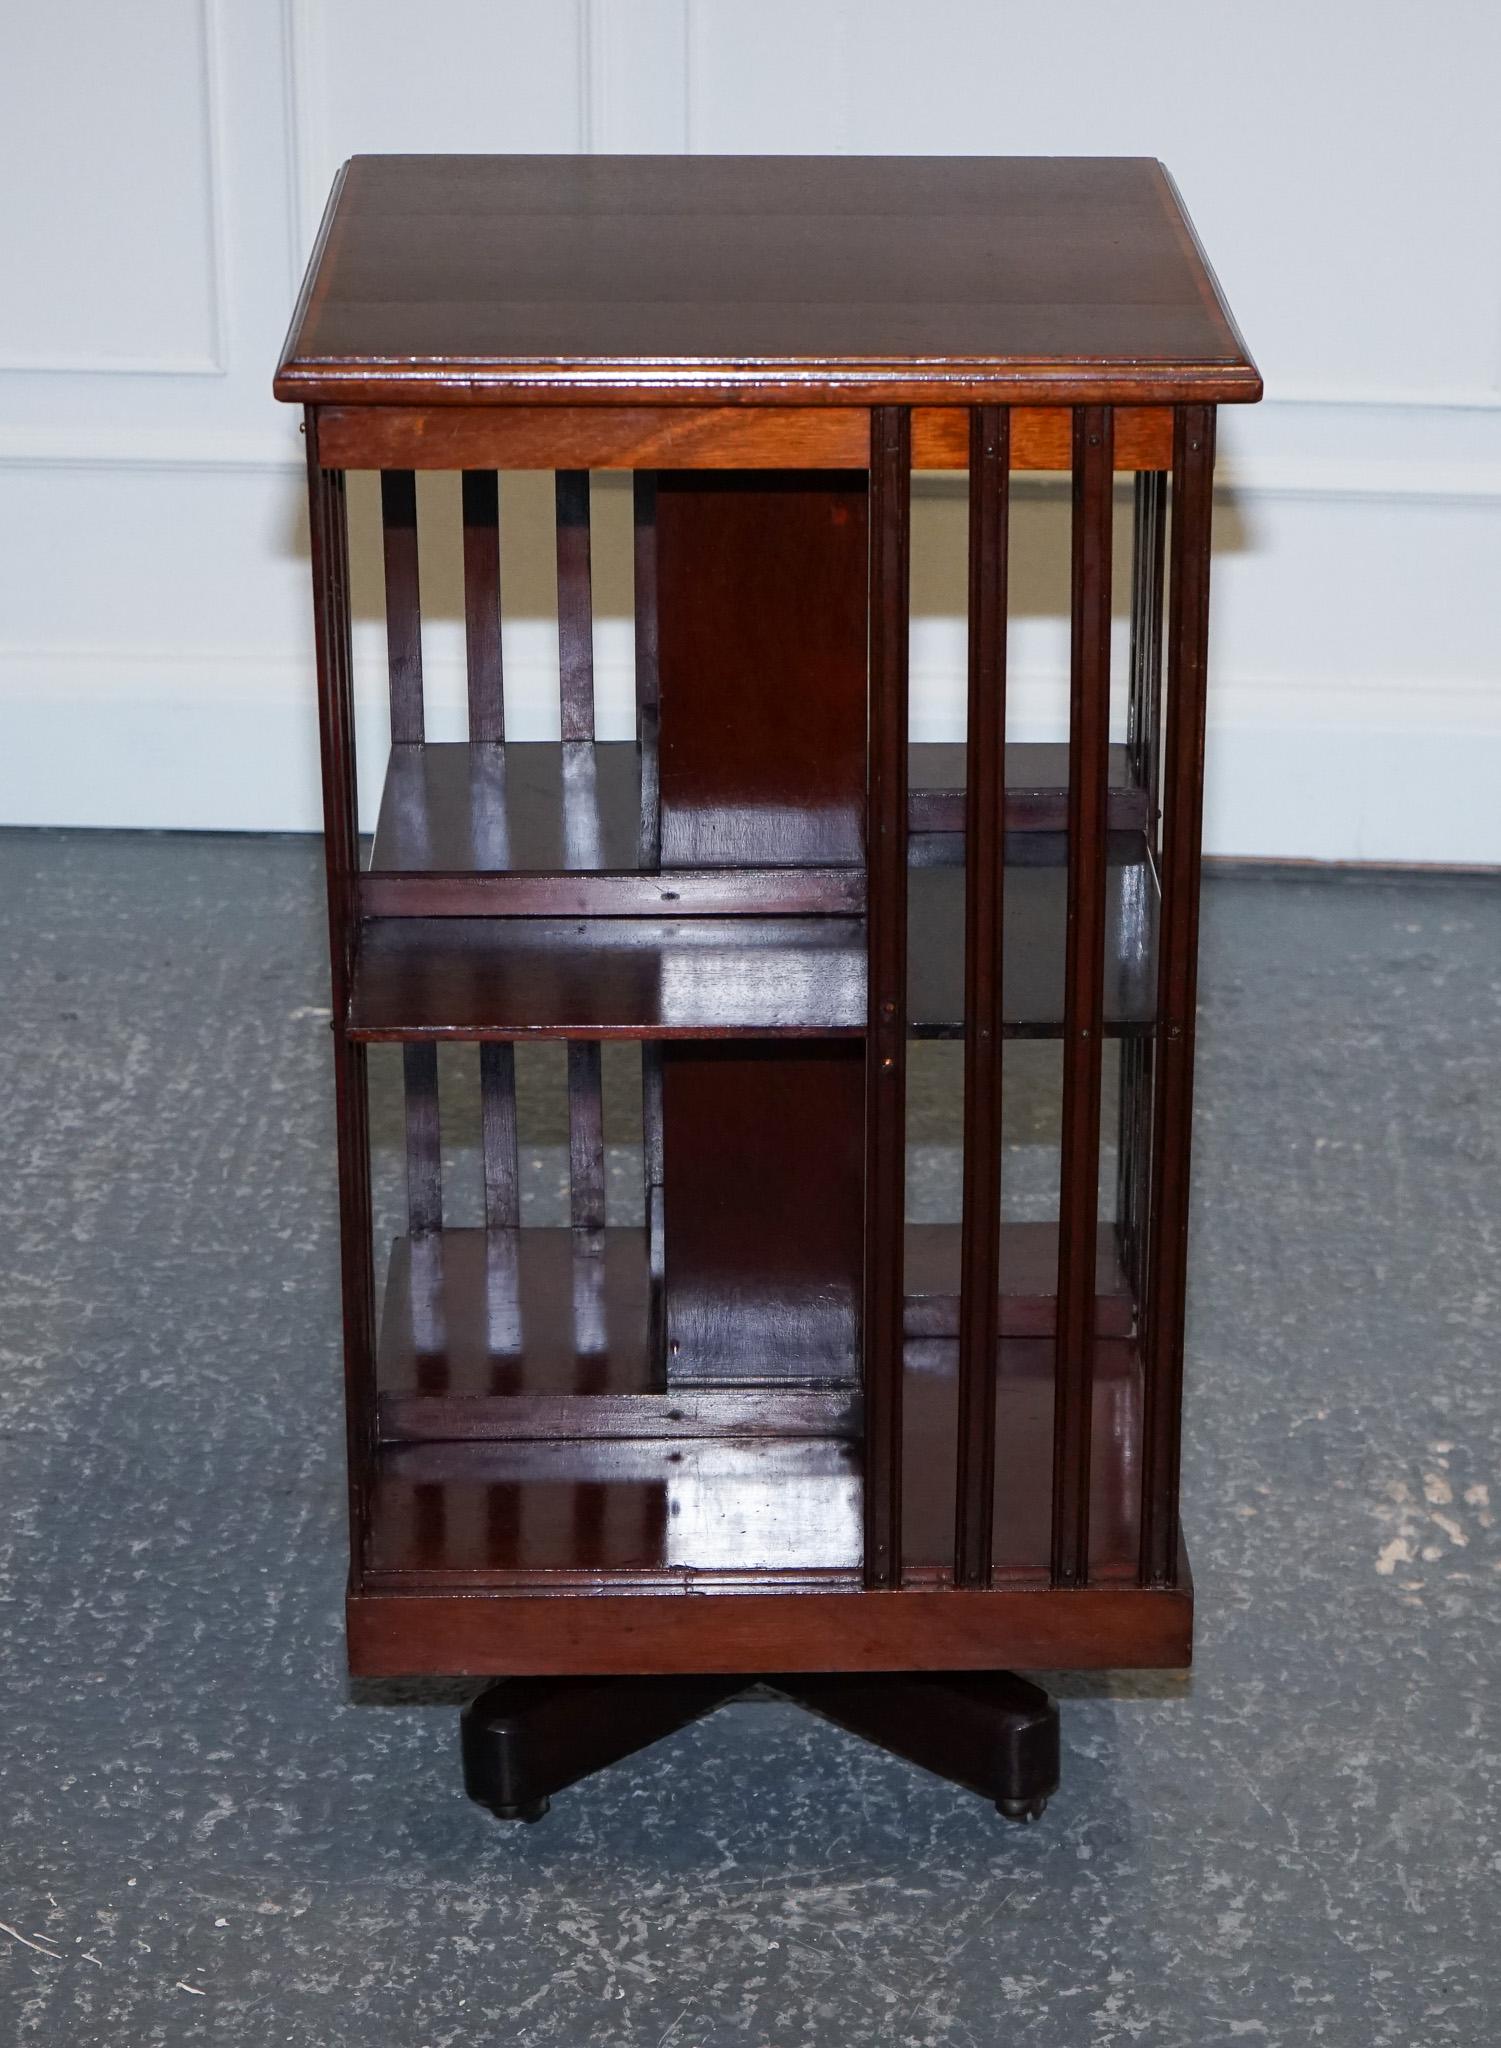 British Edwardian Inlaid Sheraton Revival Two Tier Revolving Bookcase For Sale